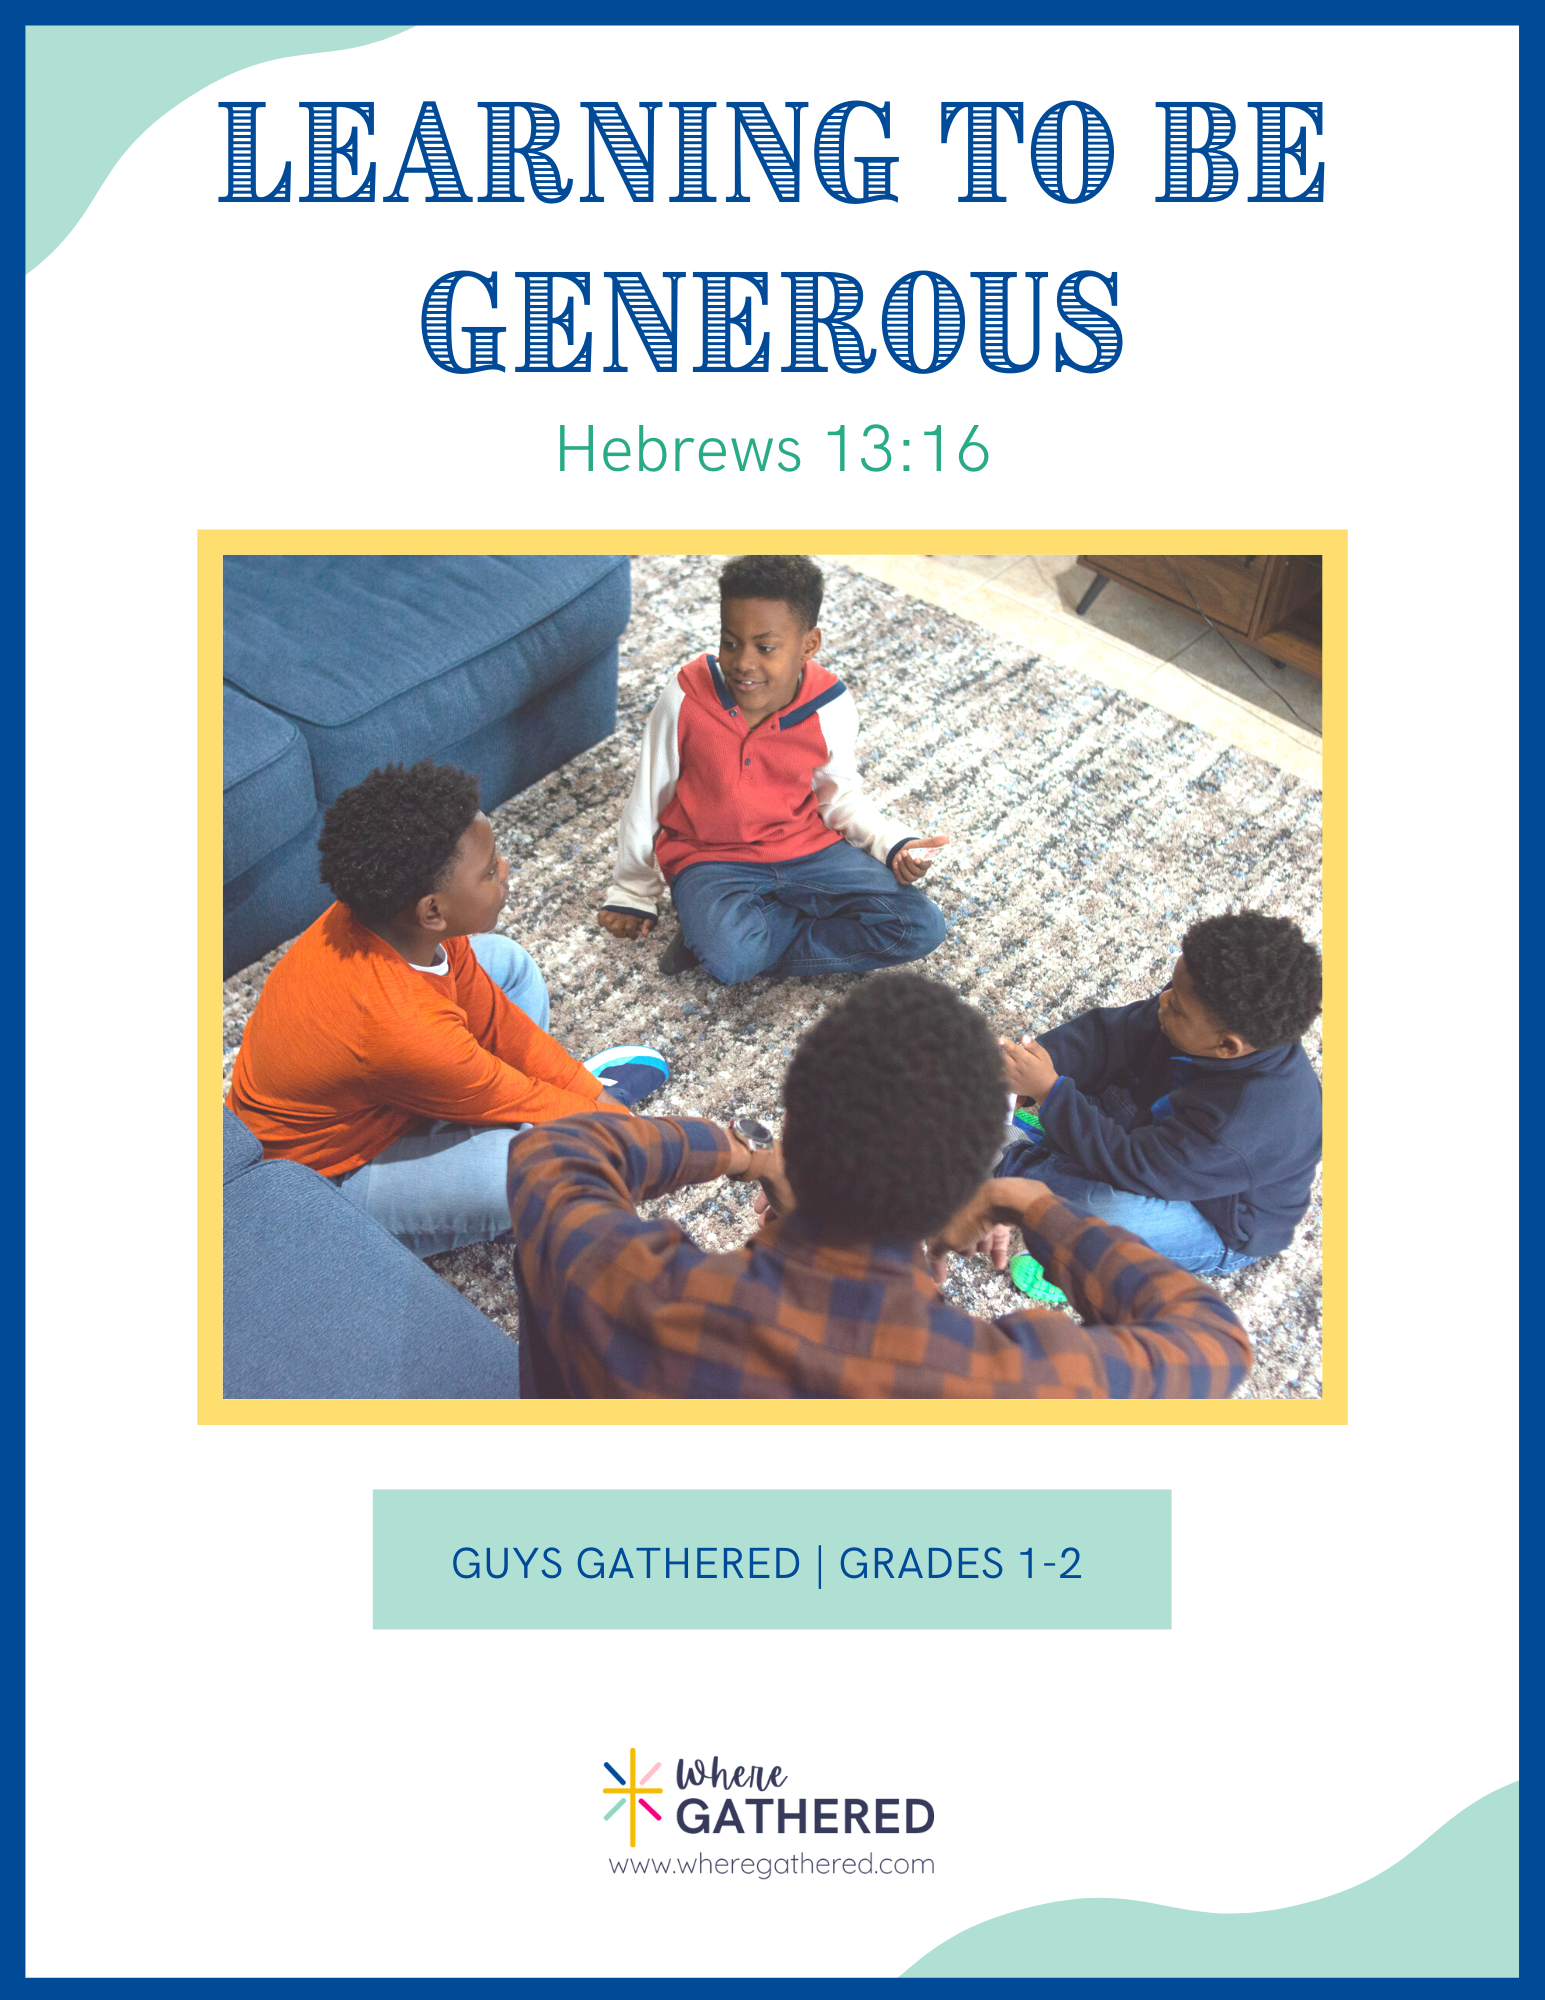 A cover of the Life Group Kit for kids Bible study lesson on Learning to be Generous for boys.